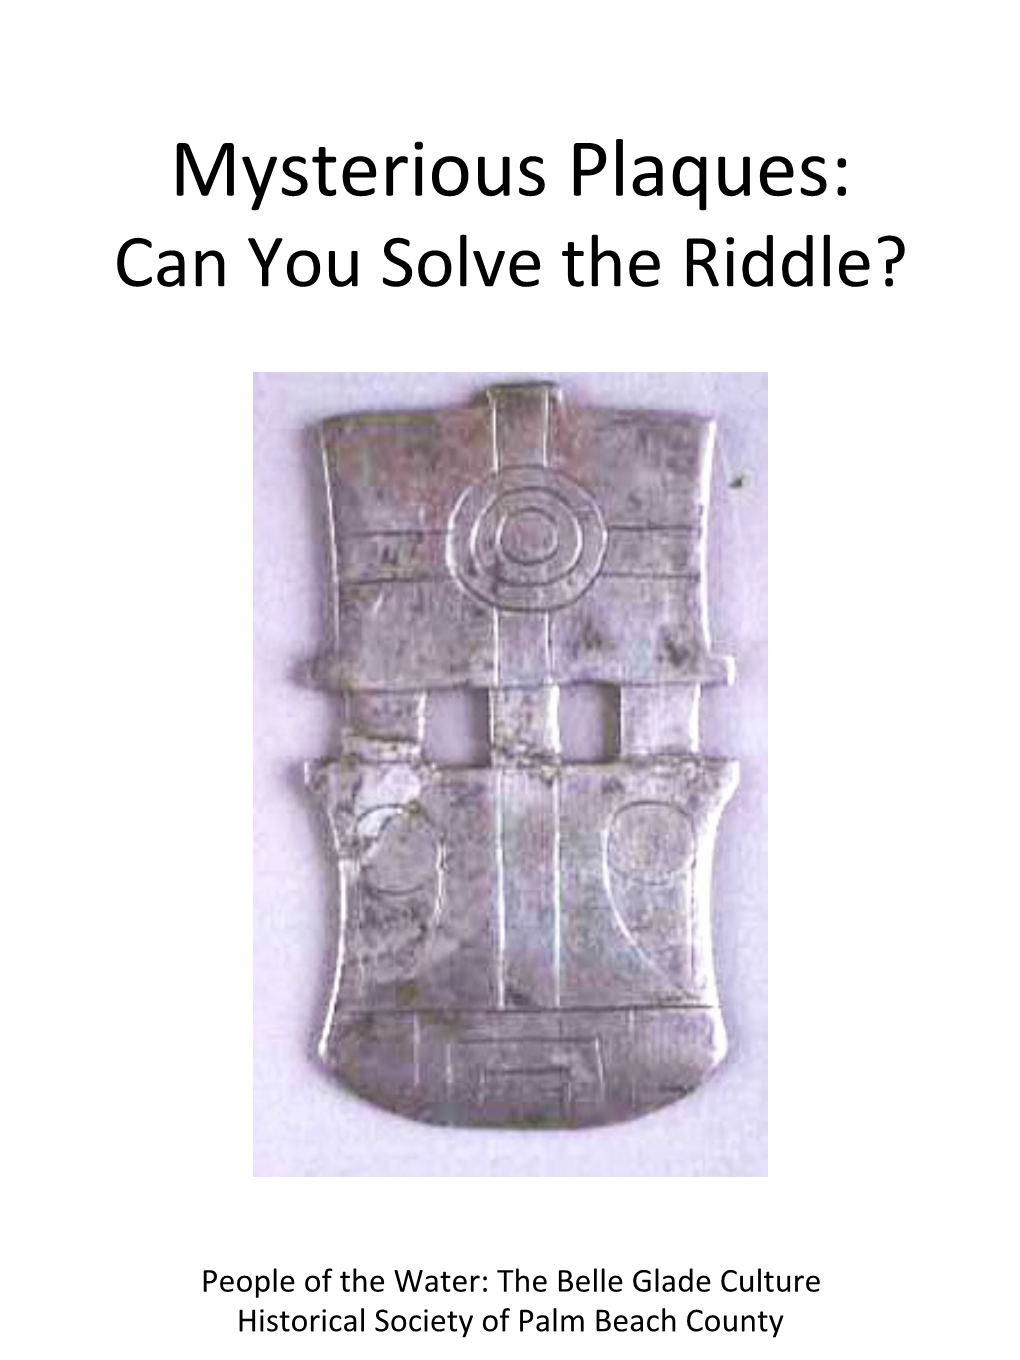 Mysterious Plaques: Can You Solve the Riddle?